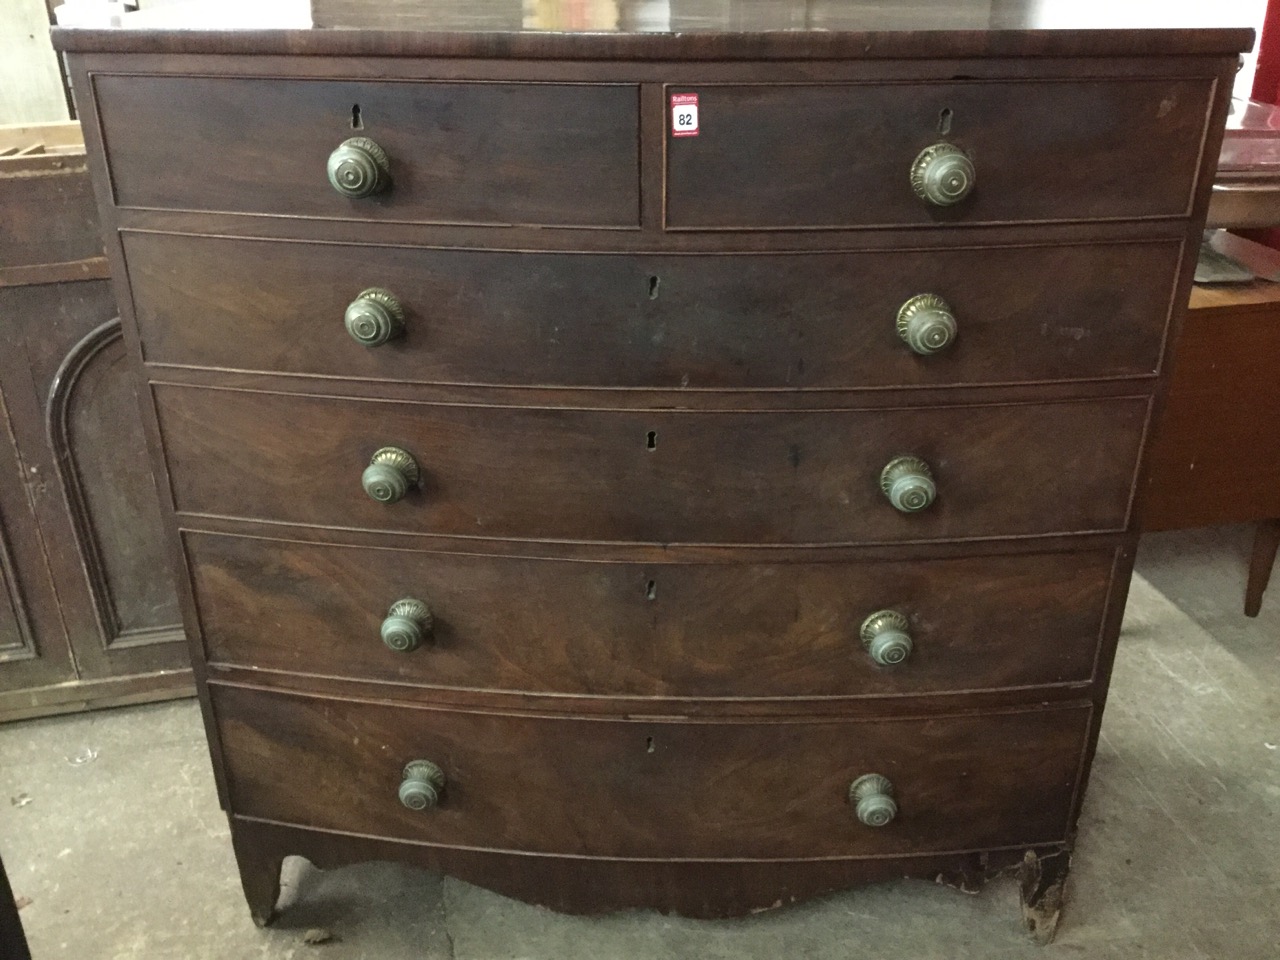 A nineteenth century mahogany bowfronted chest of drawers, with two short and four long cockbeaded